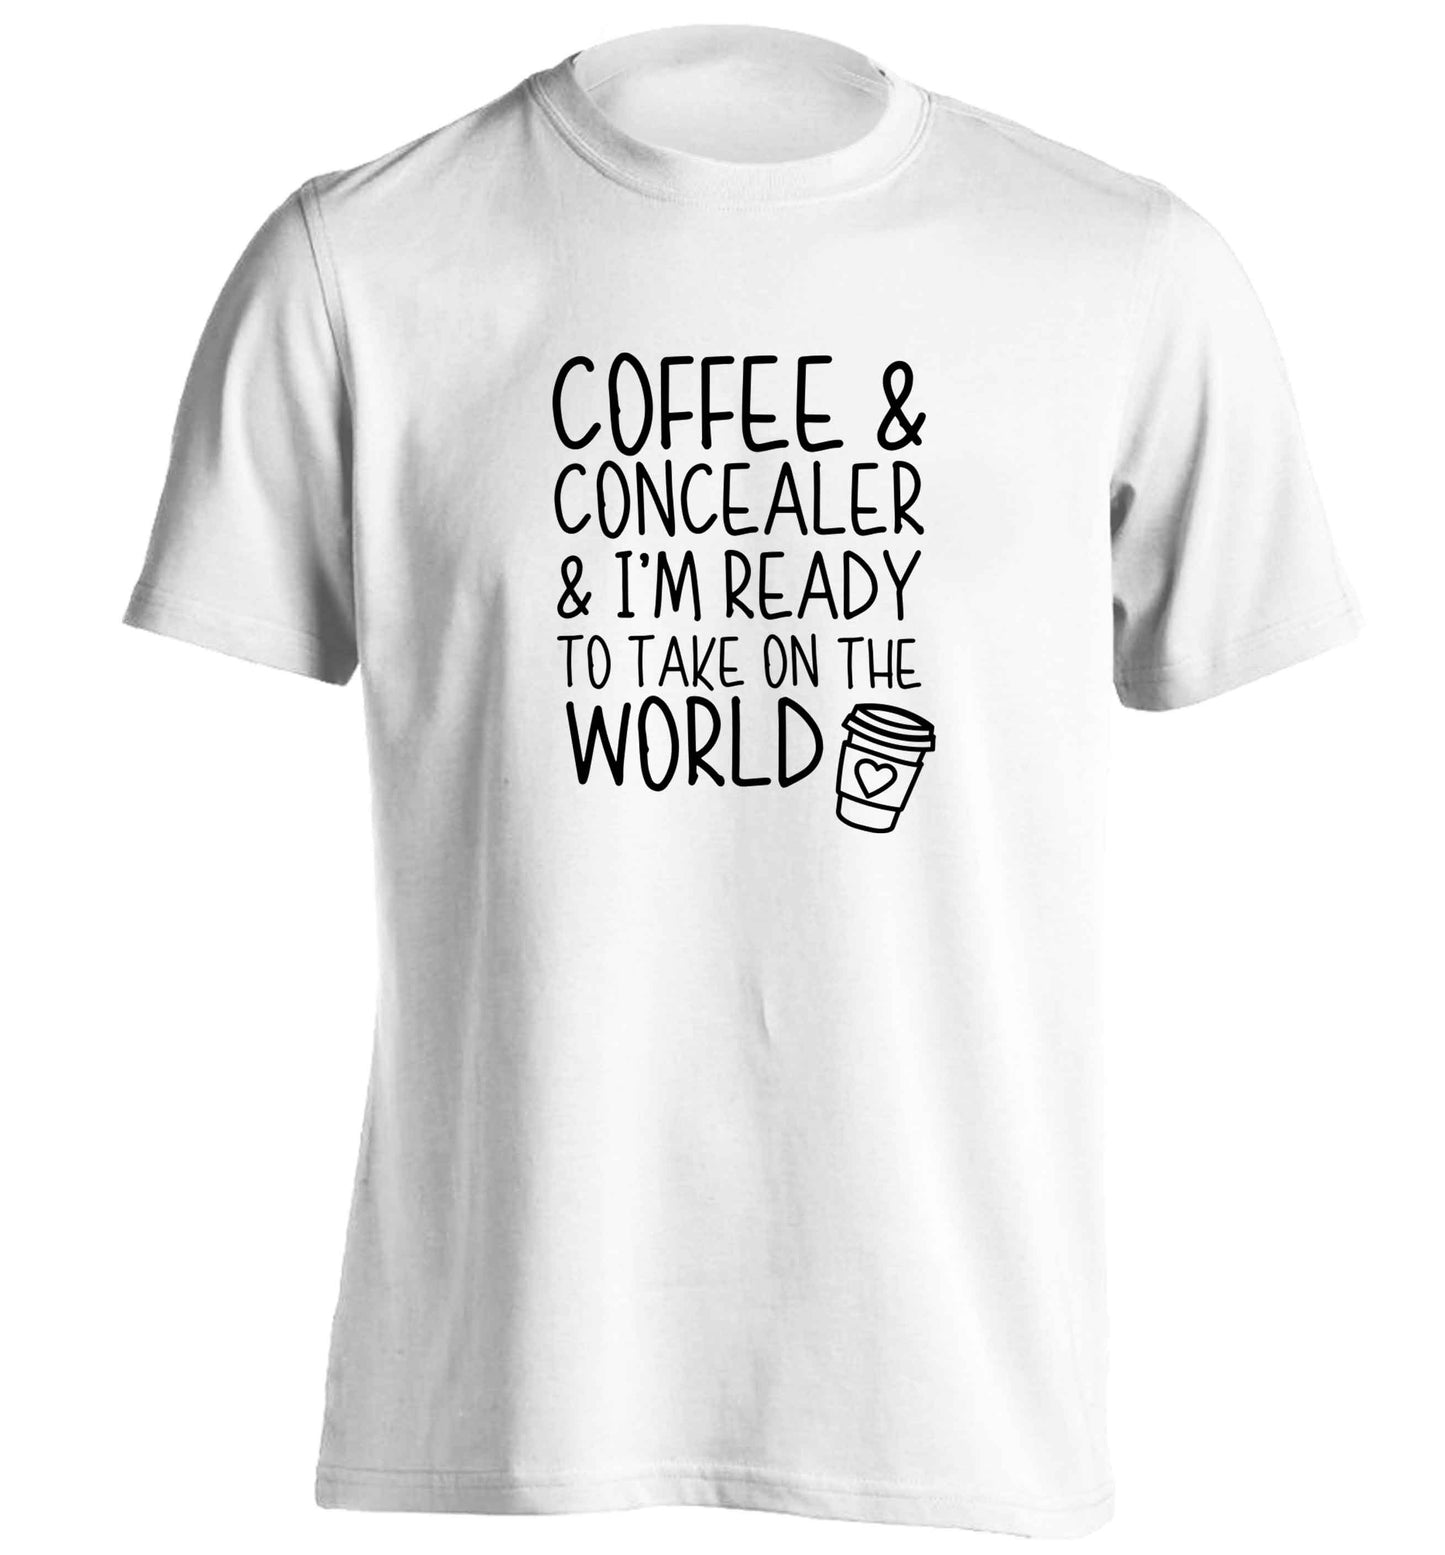 Coffee and concealer and I'm ready to take on the world adults unisex white Tshirt 2XL